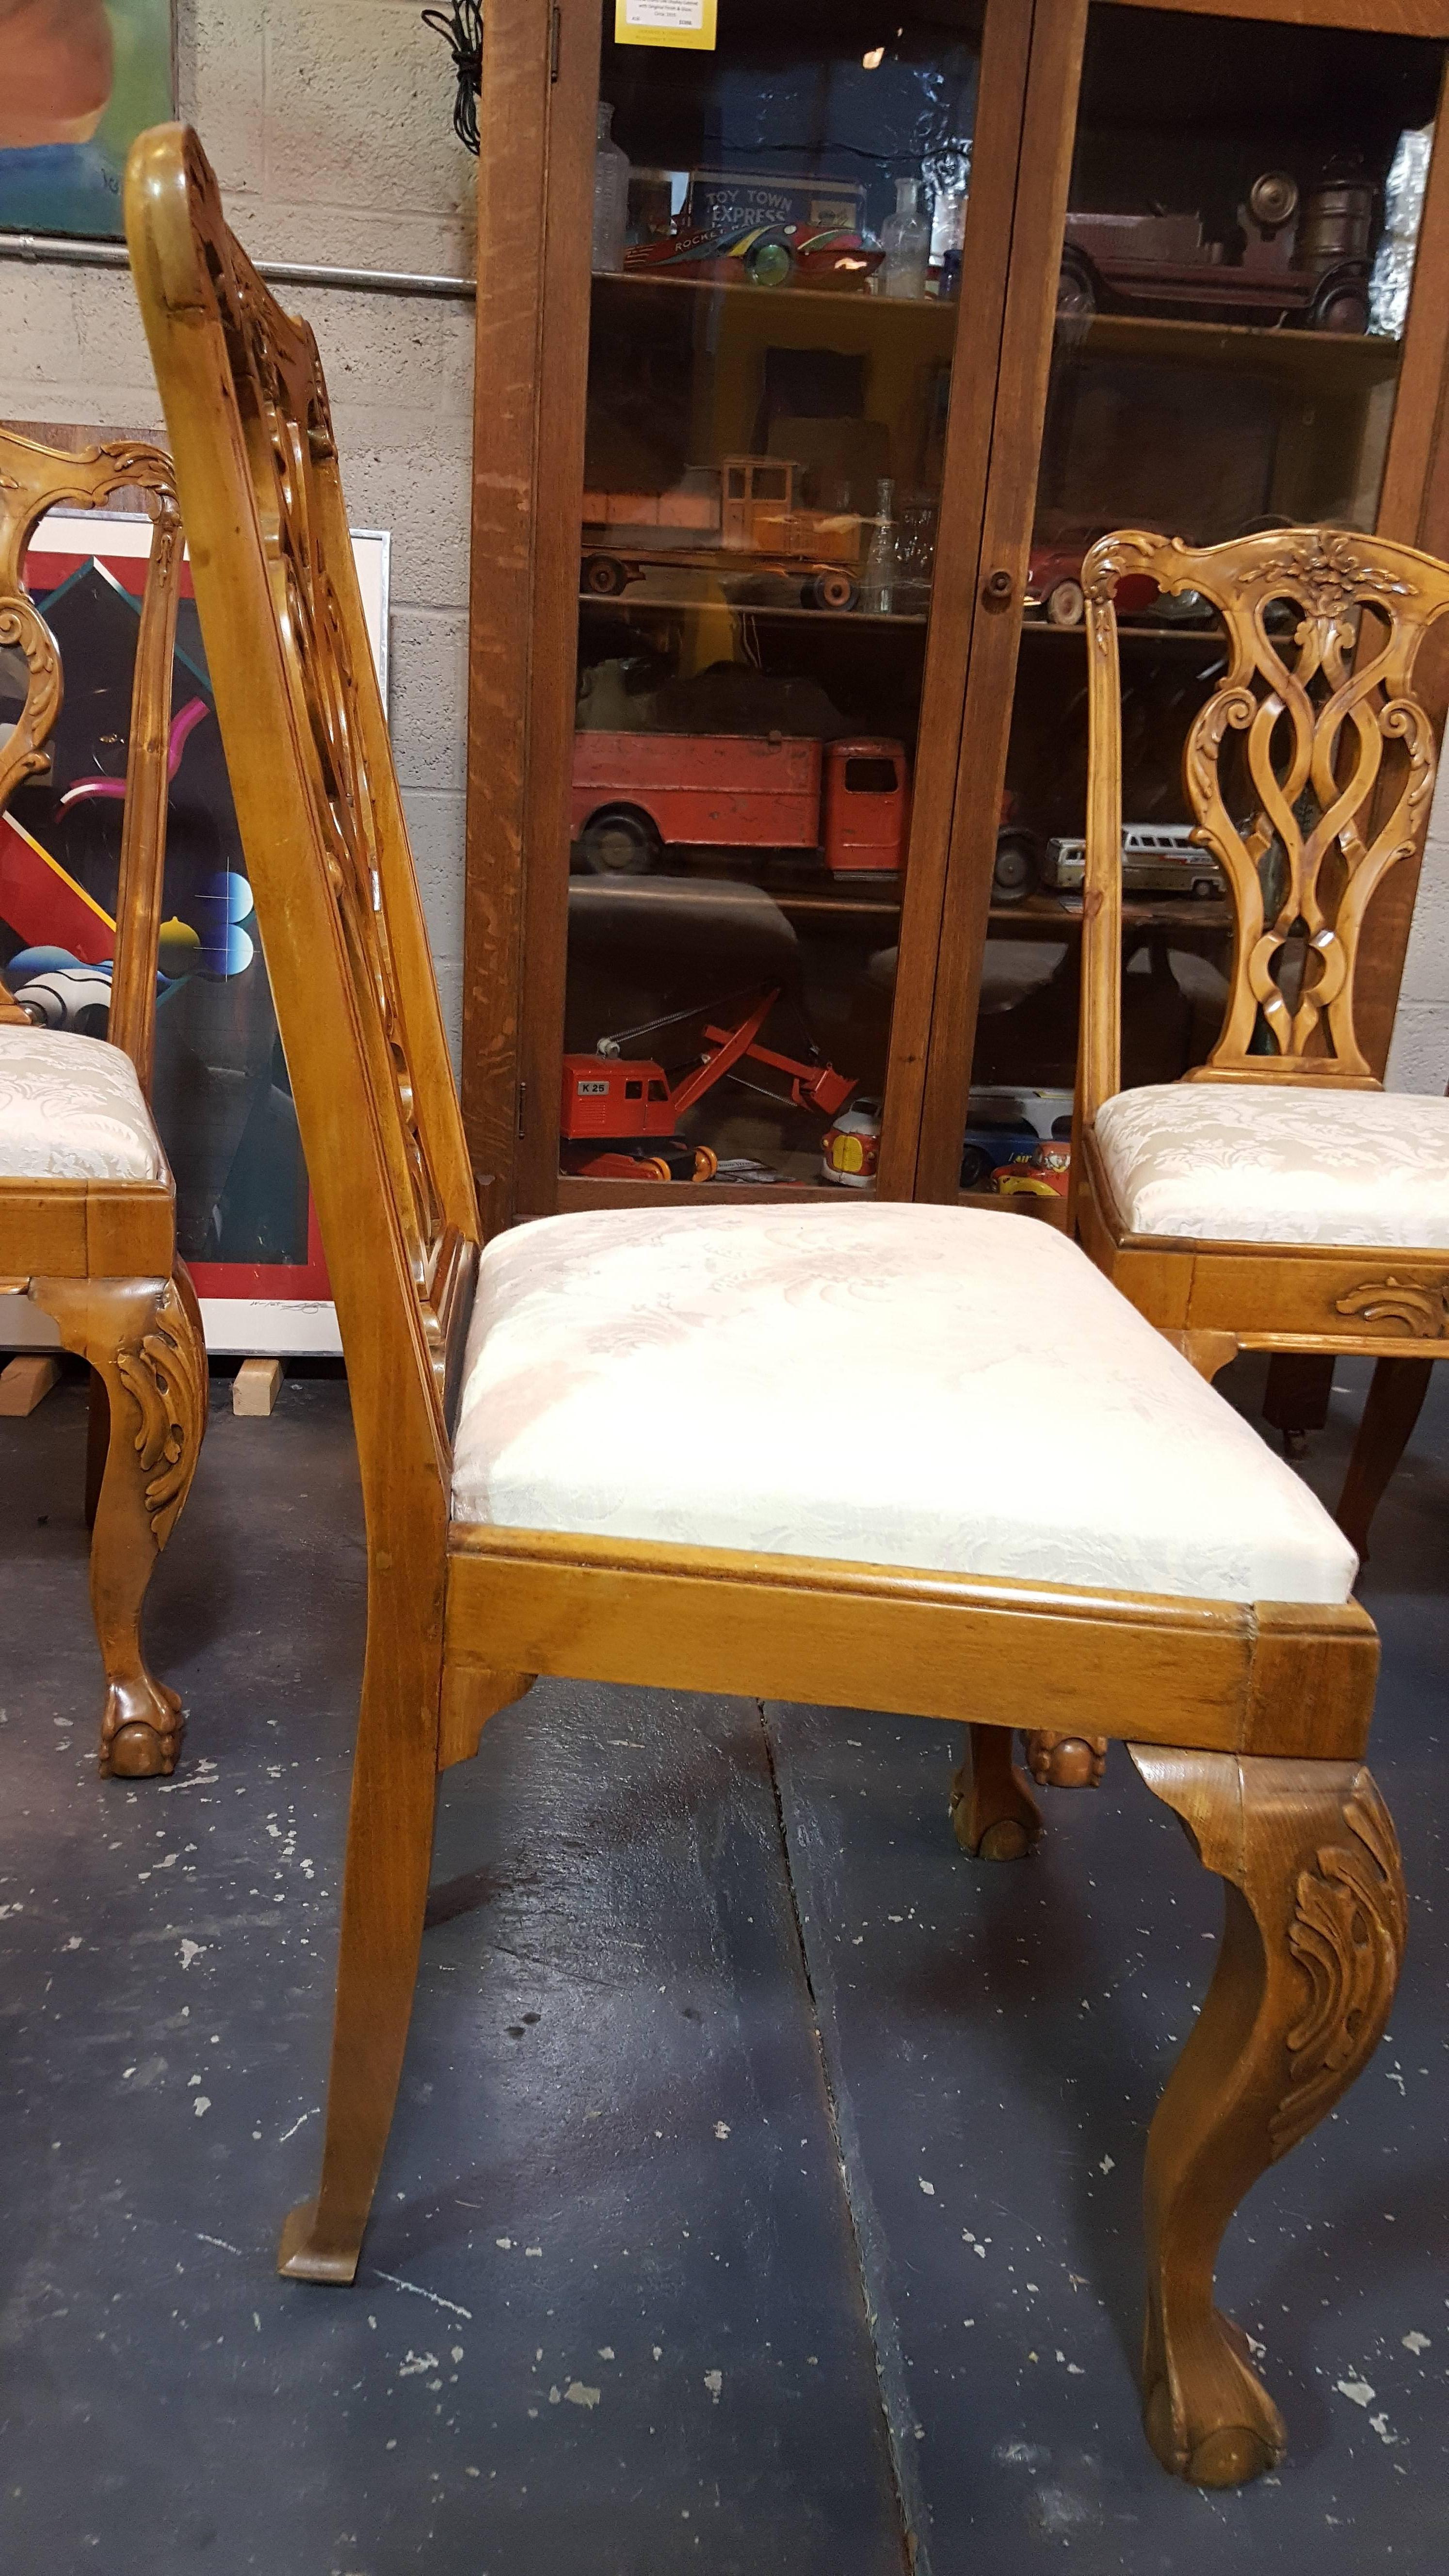 A set of four Chippendale style dining chairs. Hand-carved details with ball and claw foot, cabriolet leg, acanthus leaves and floral pattern. Older restoration, a solid, sturdy set of chairs. Upholstery in excellent condition.